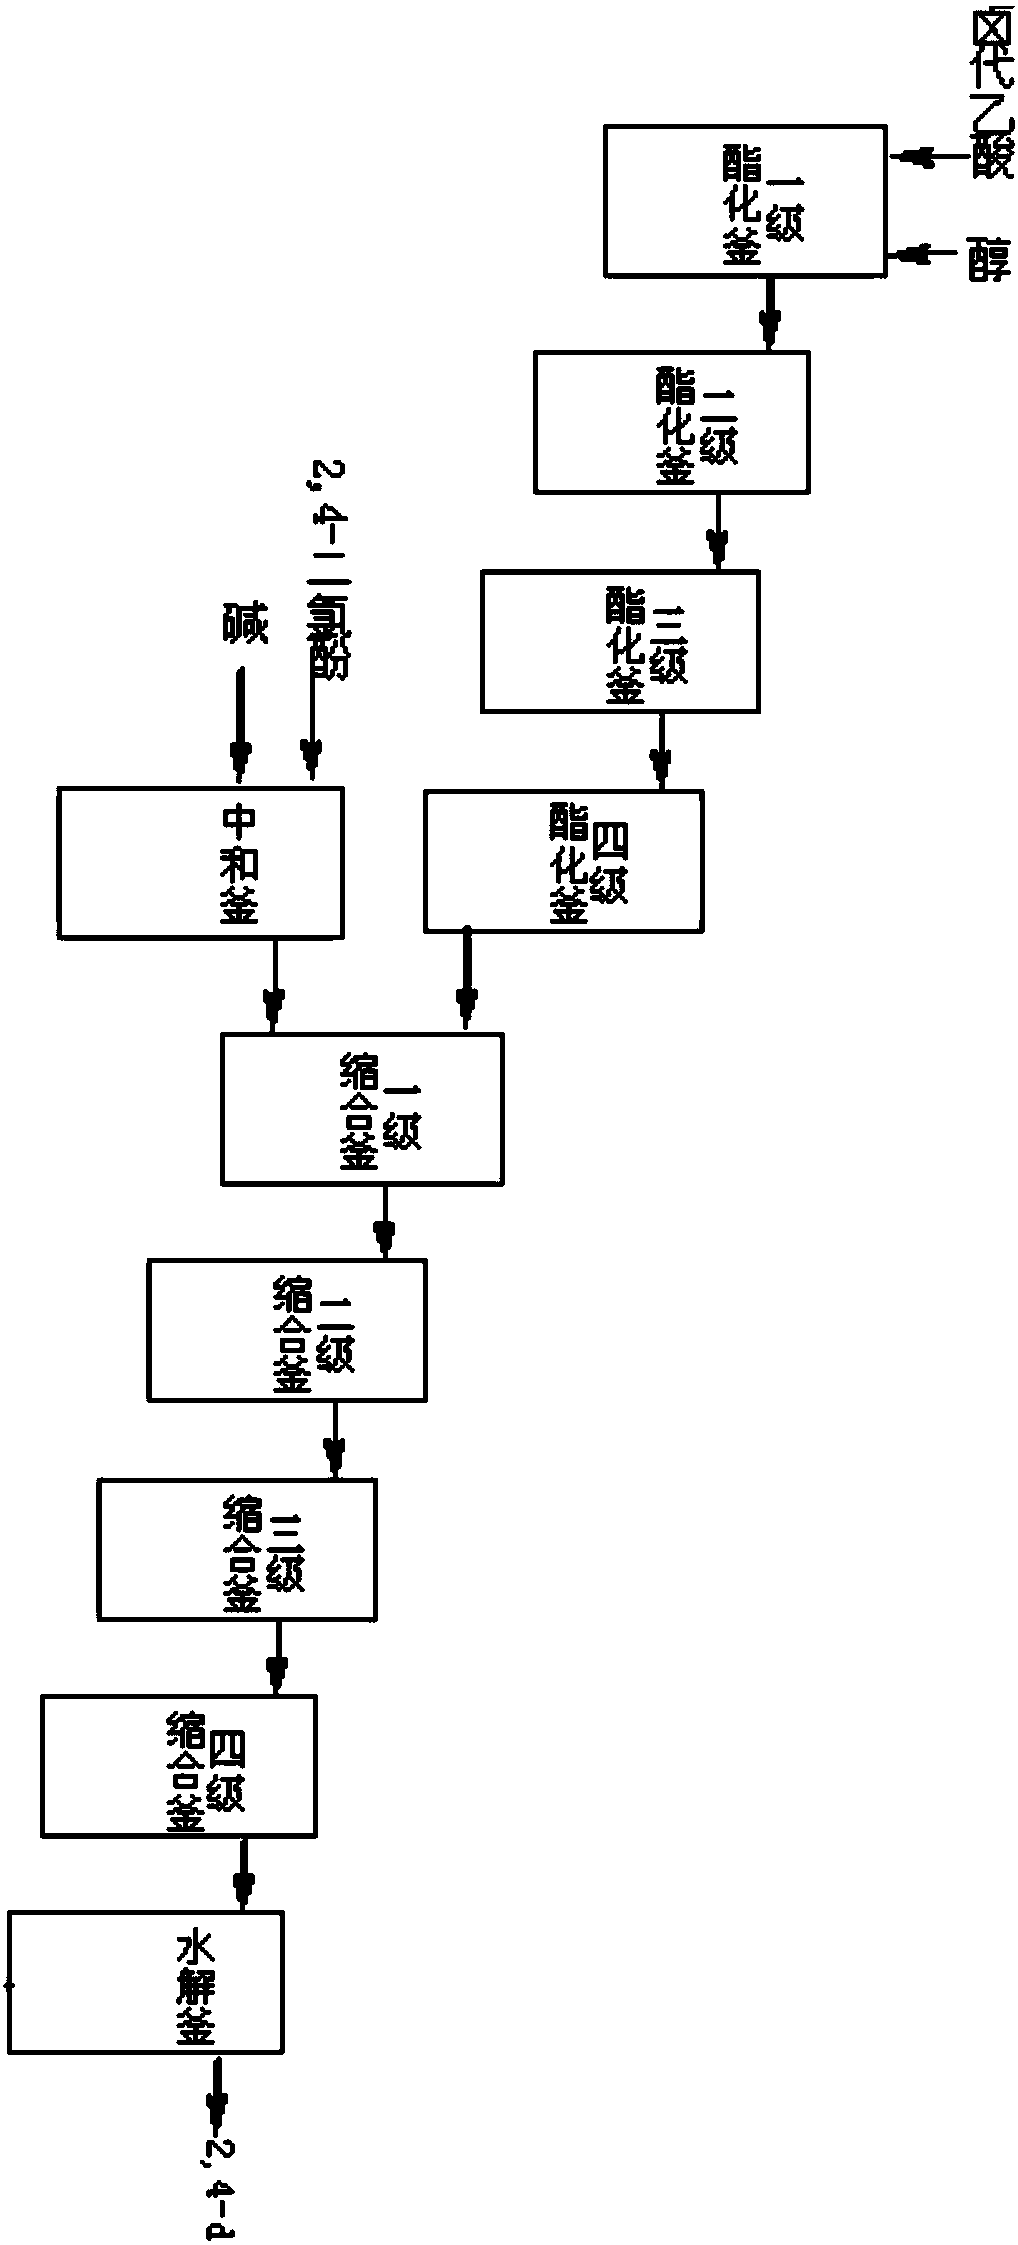 Preparation method and production system for 2,4-dichlorophenoxyacetic acid